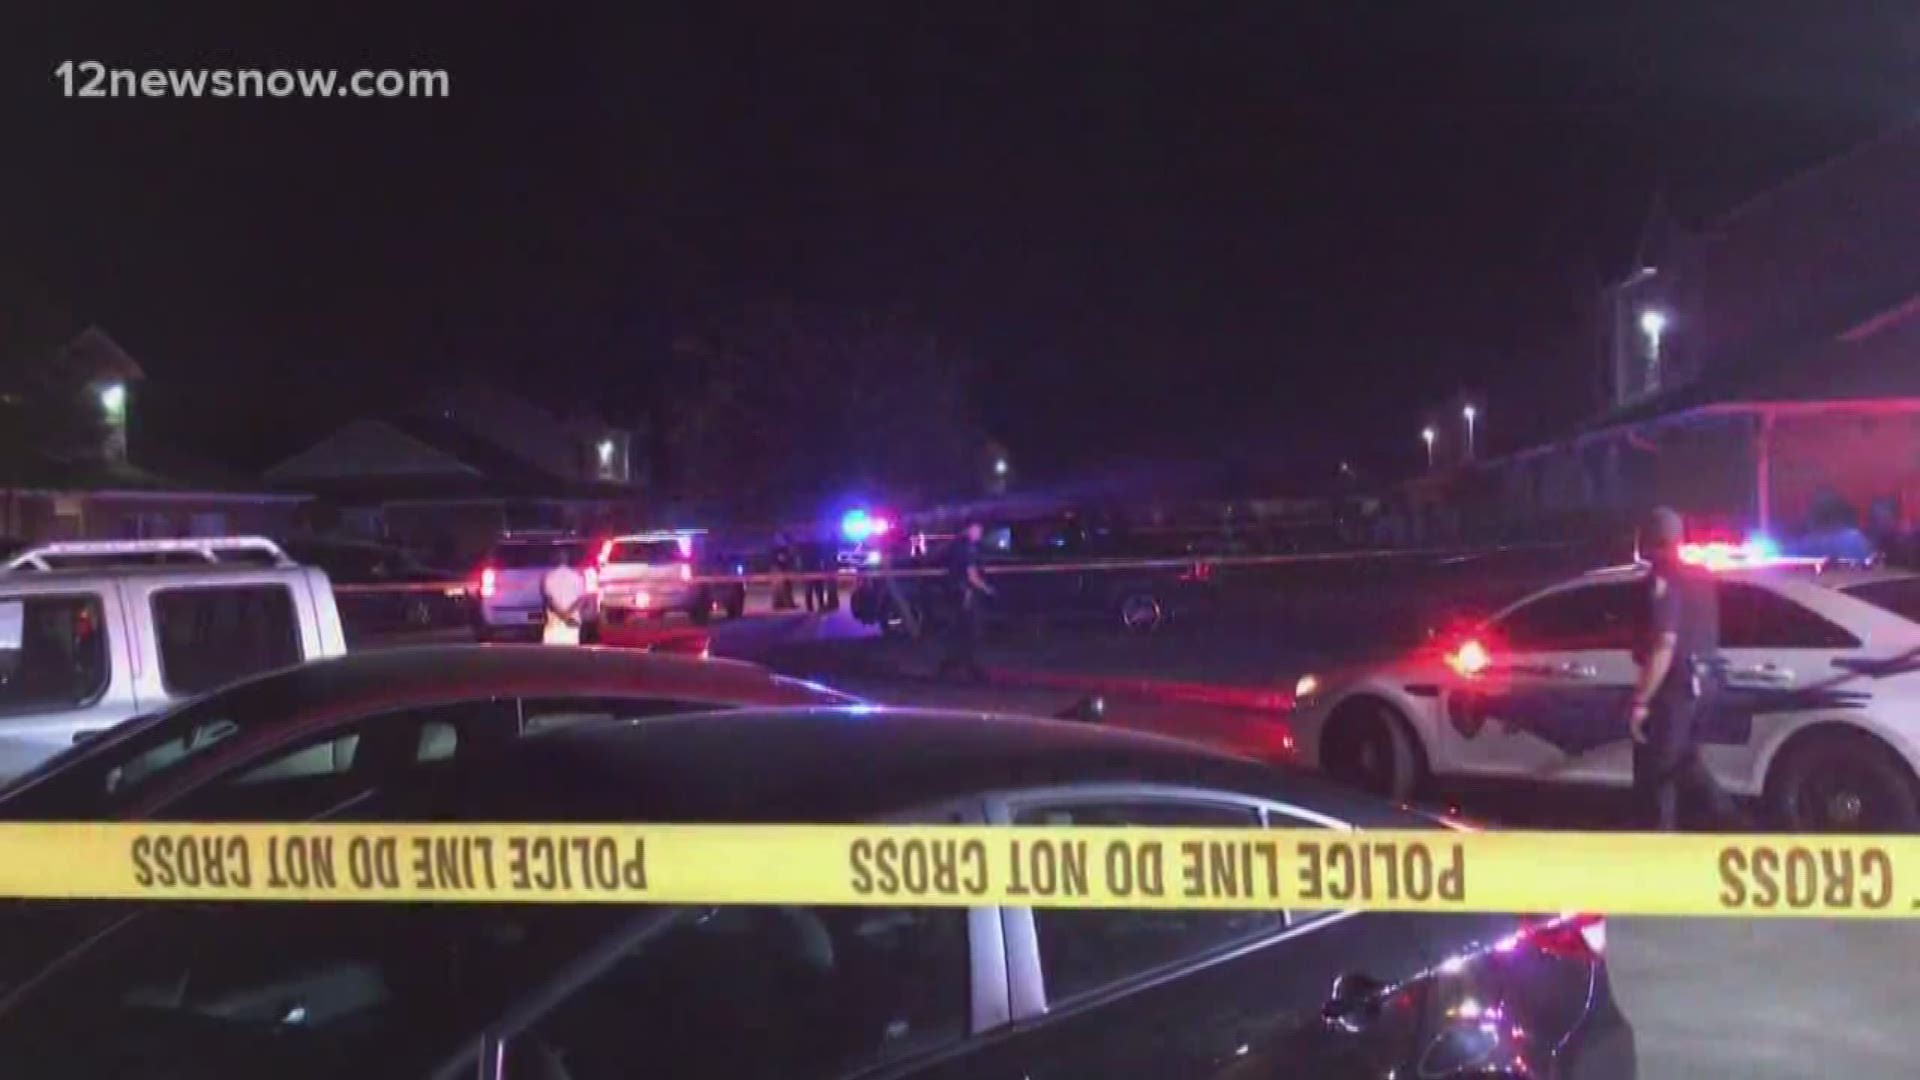 Police say someone was shot in the chest at Valley View Apartments